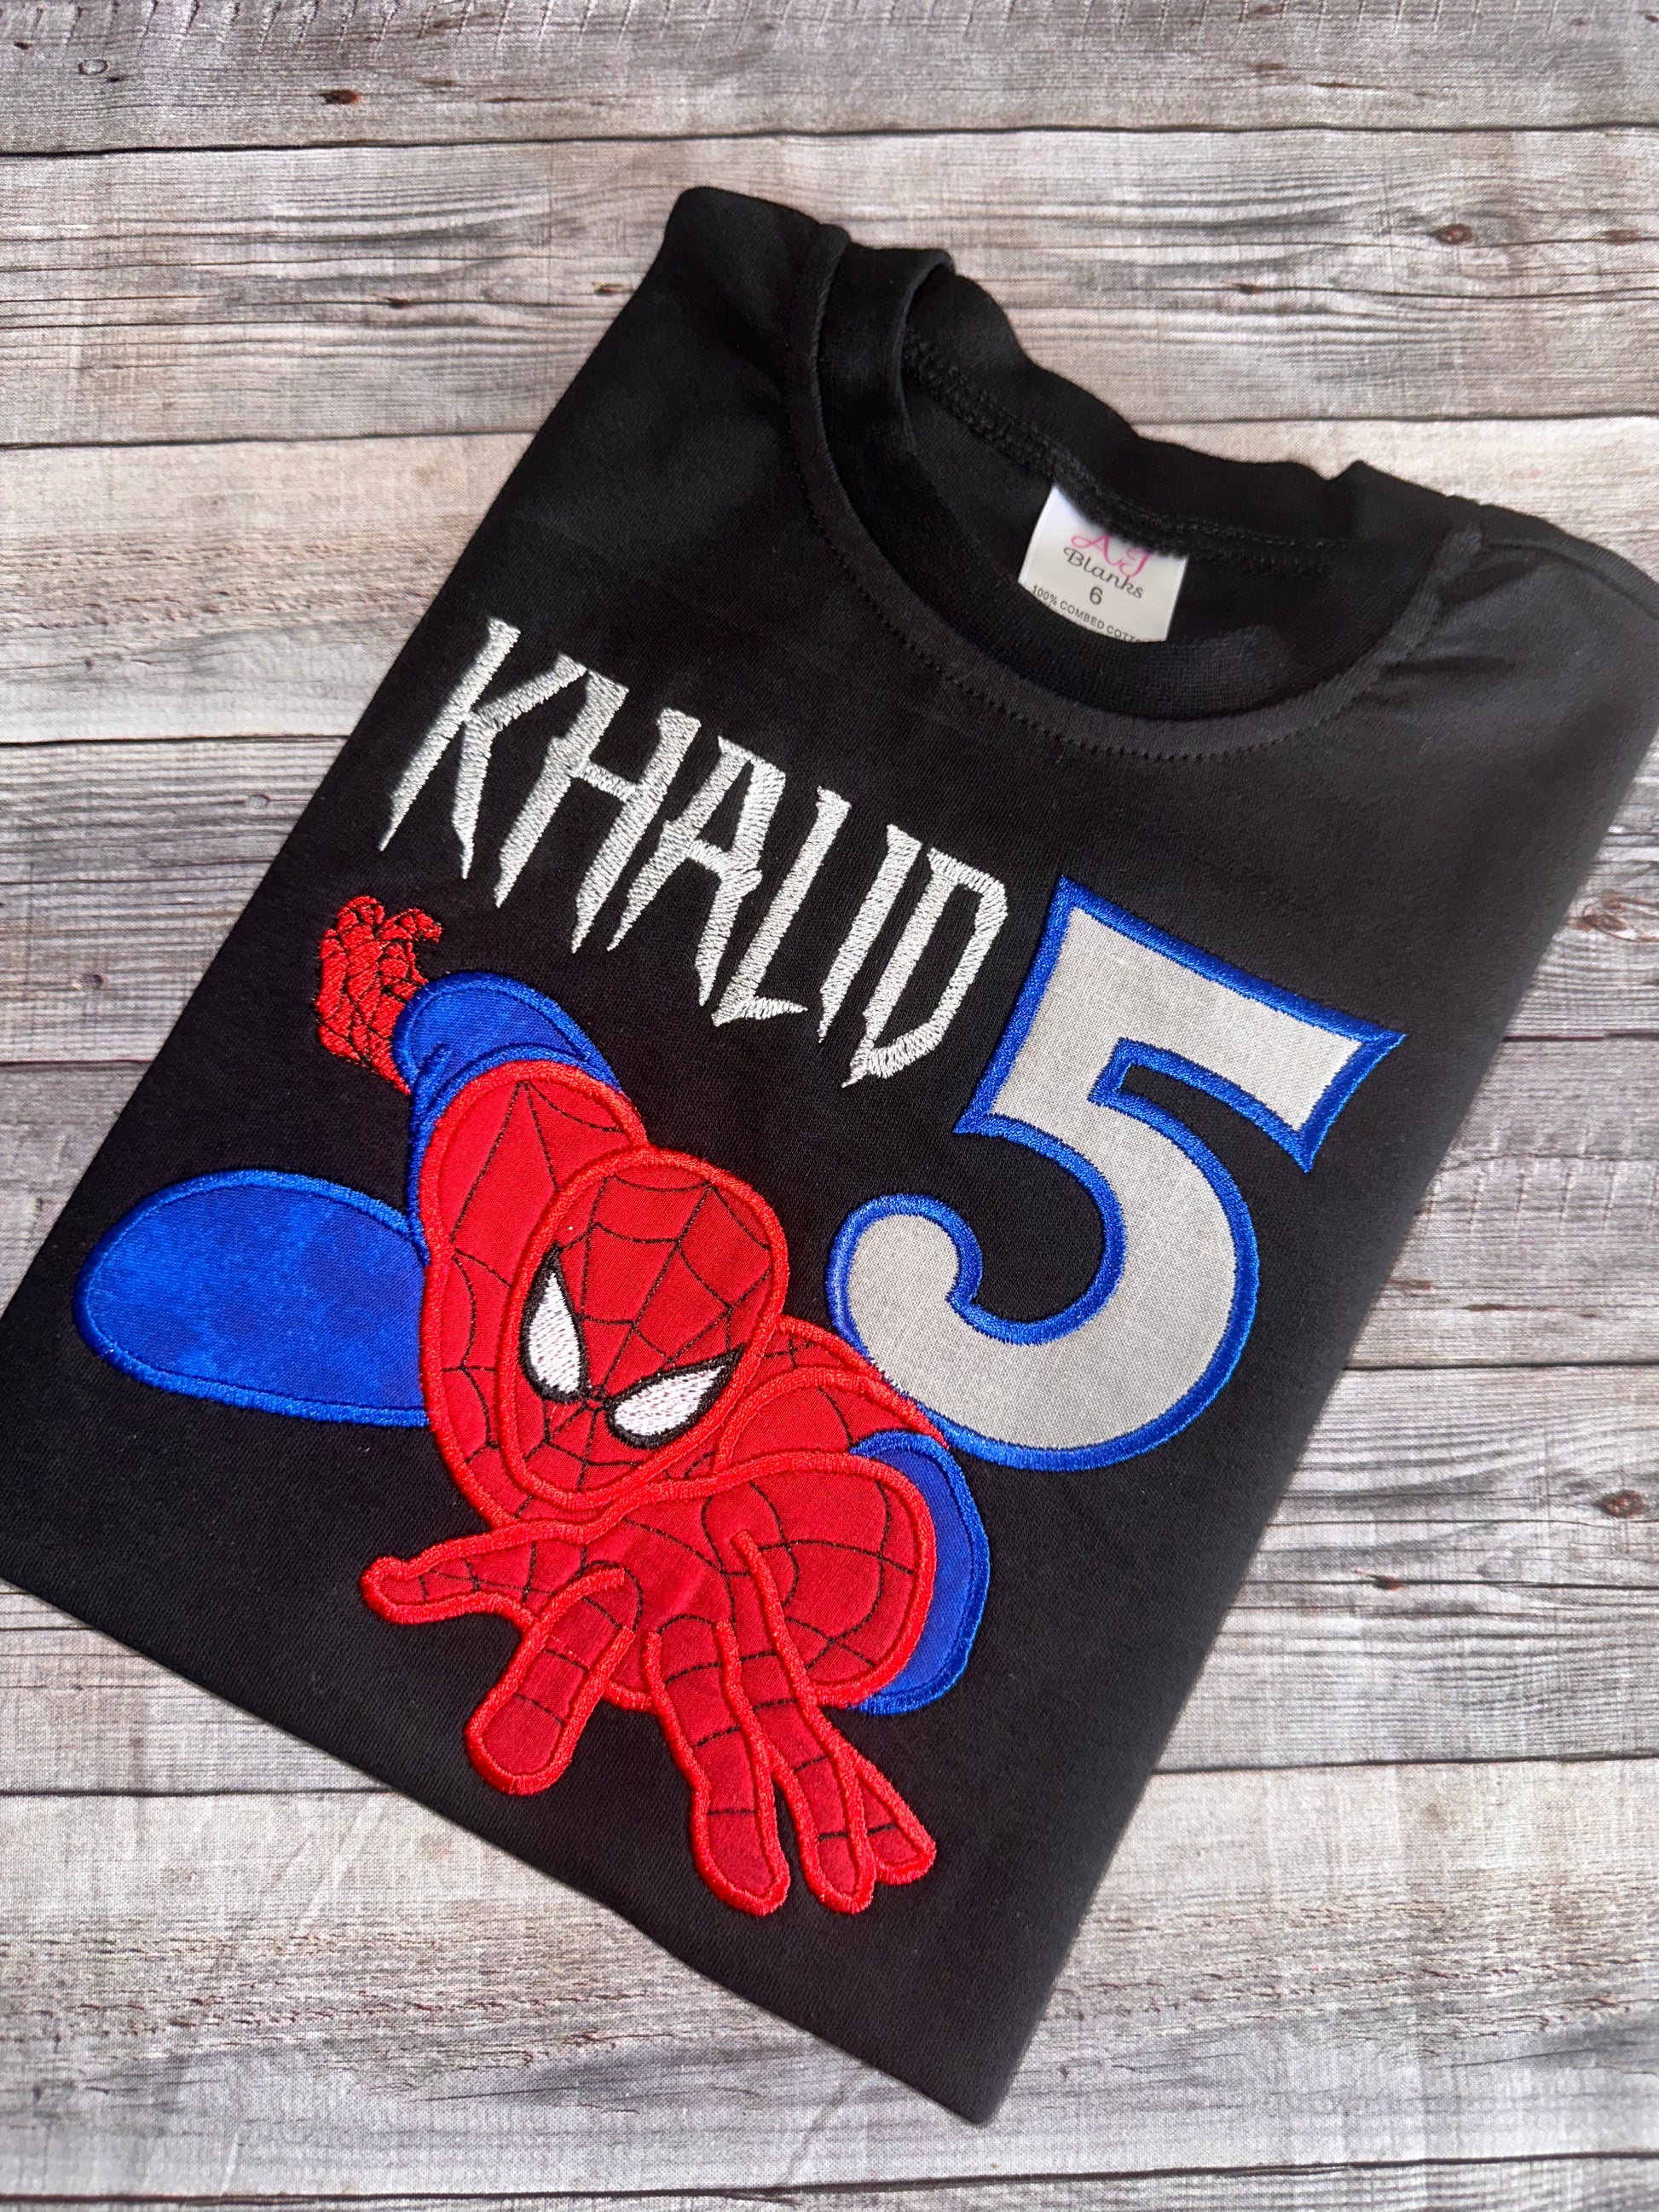 Embroidered Spiderman birthday shirt for boys 